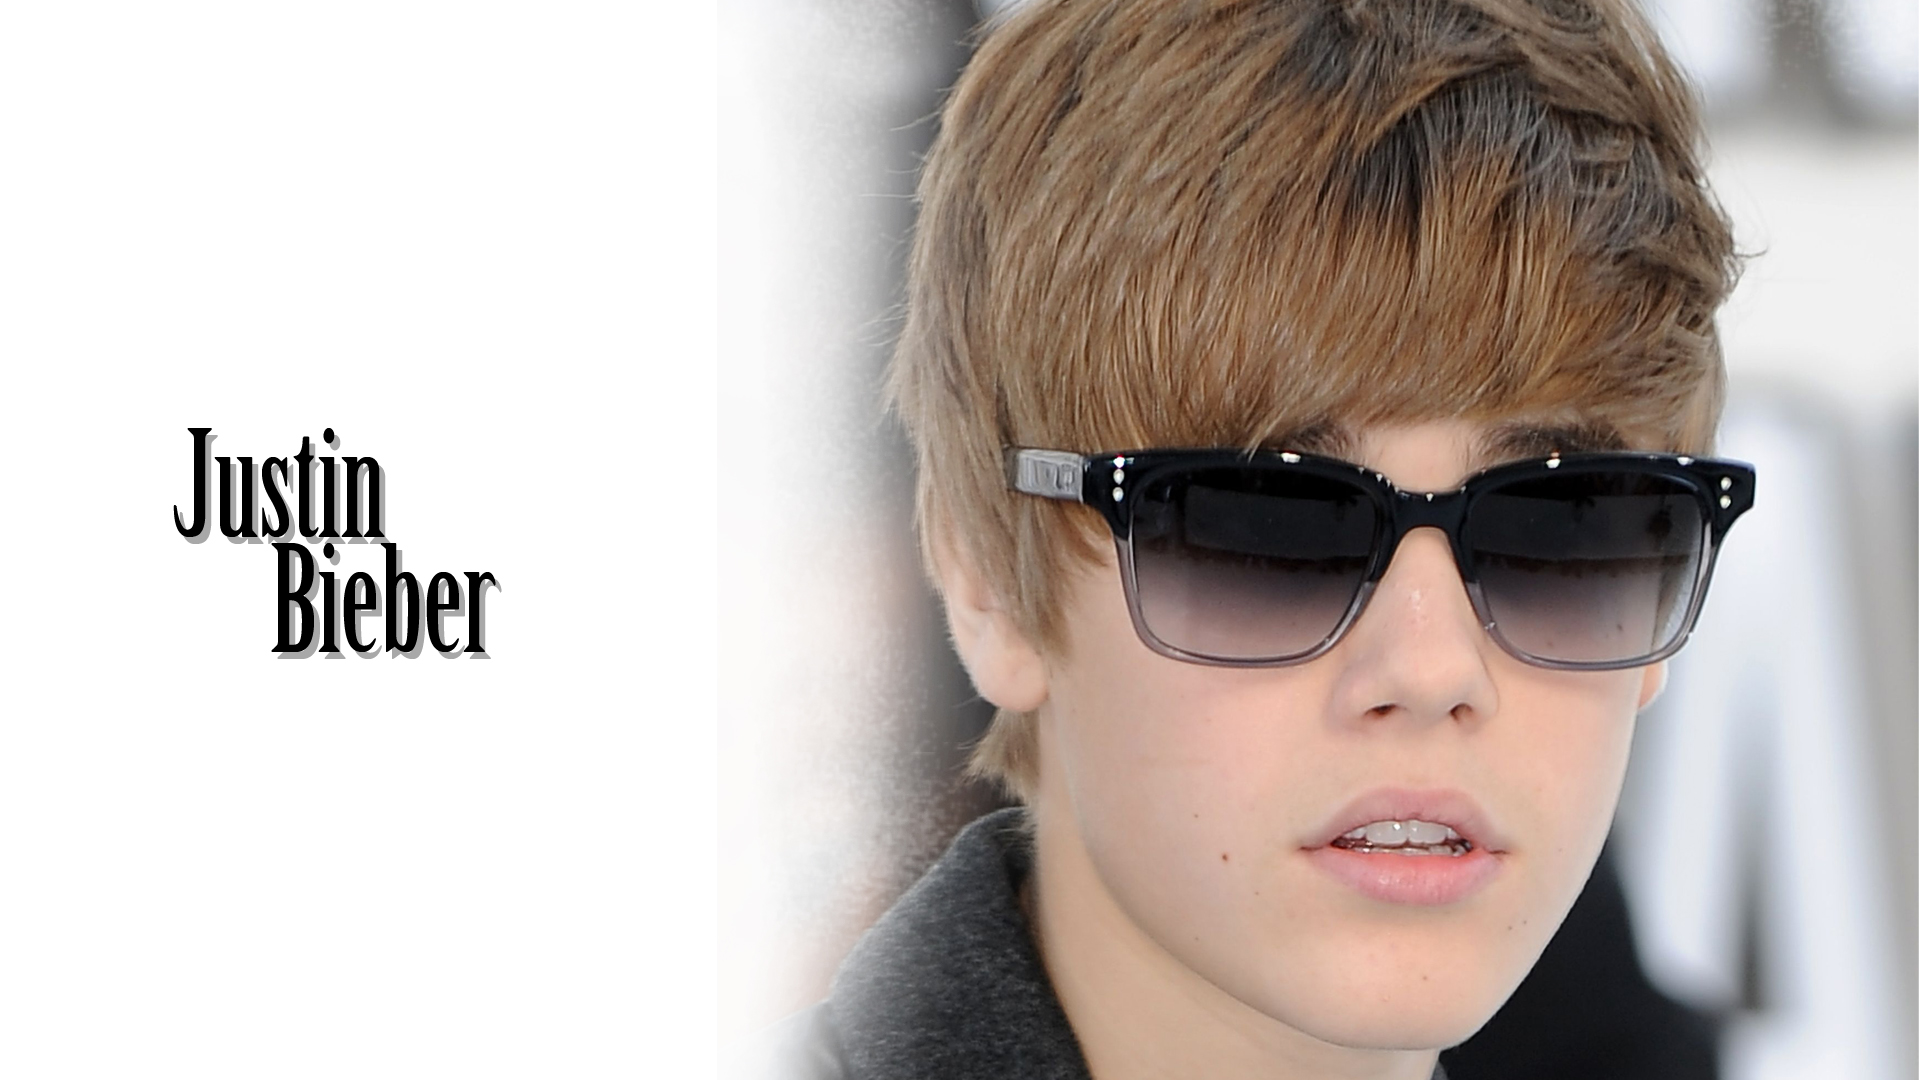 Justin Bieber Wallpapers High Quality Download Free